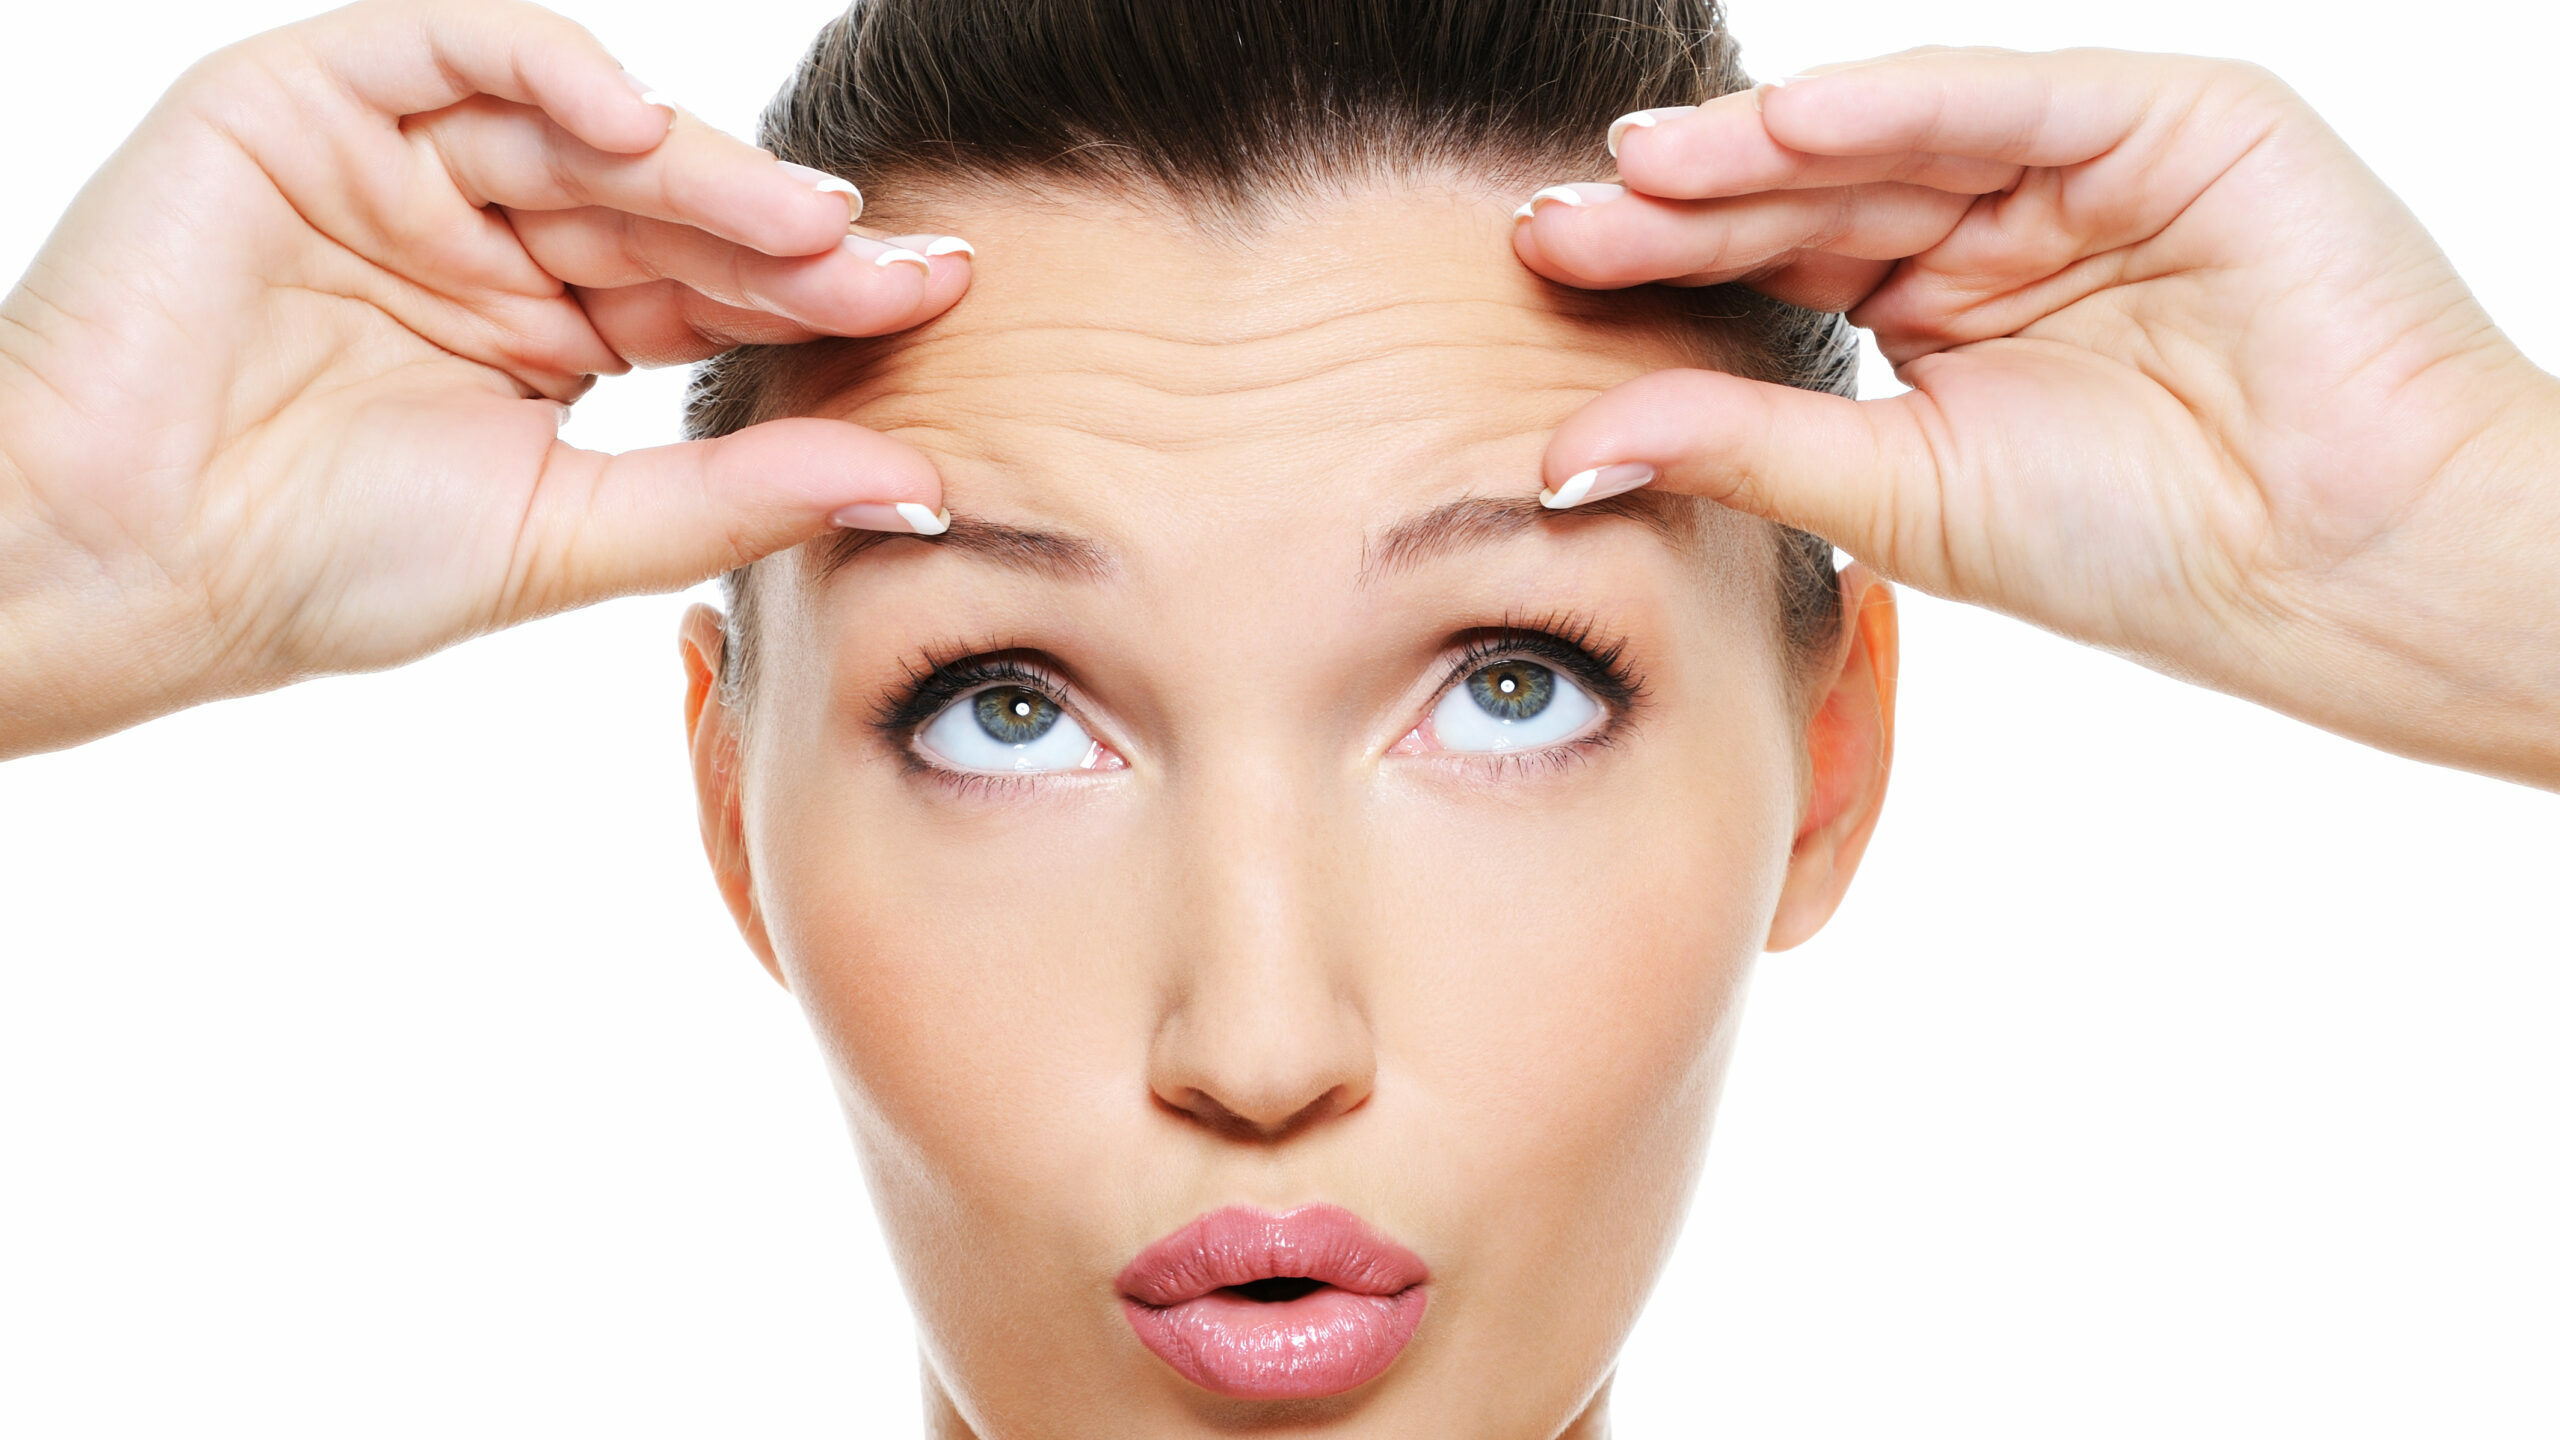 Wrinkle between eyebrows: Causes, treatments, and maintenance